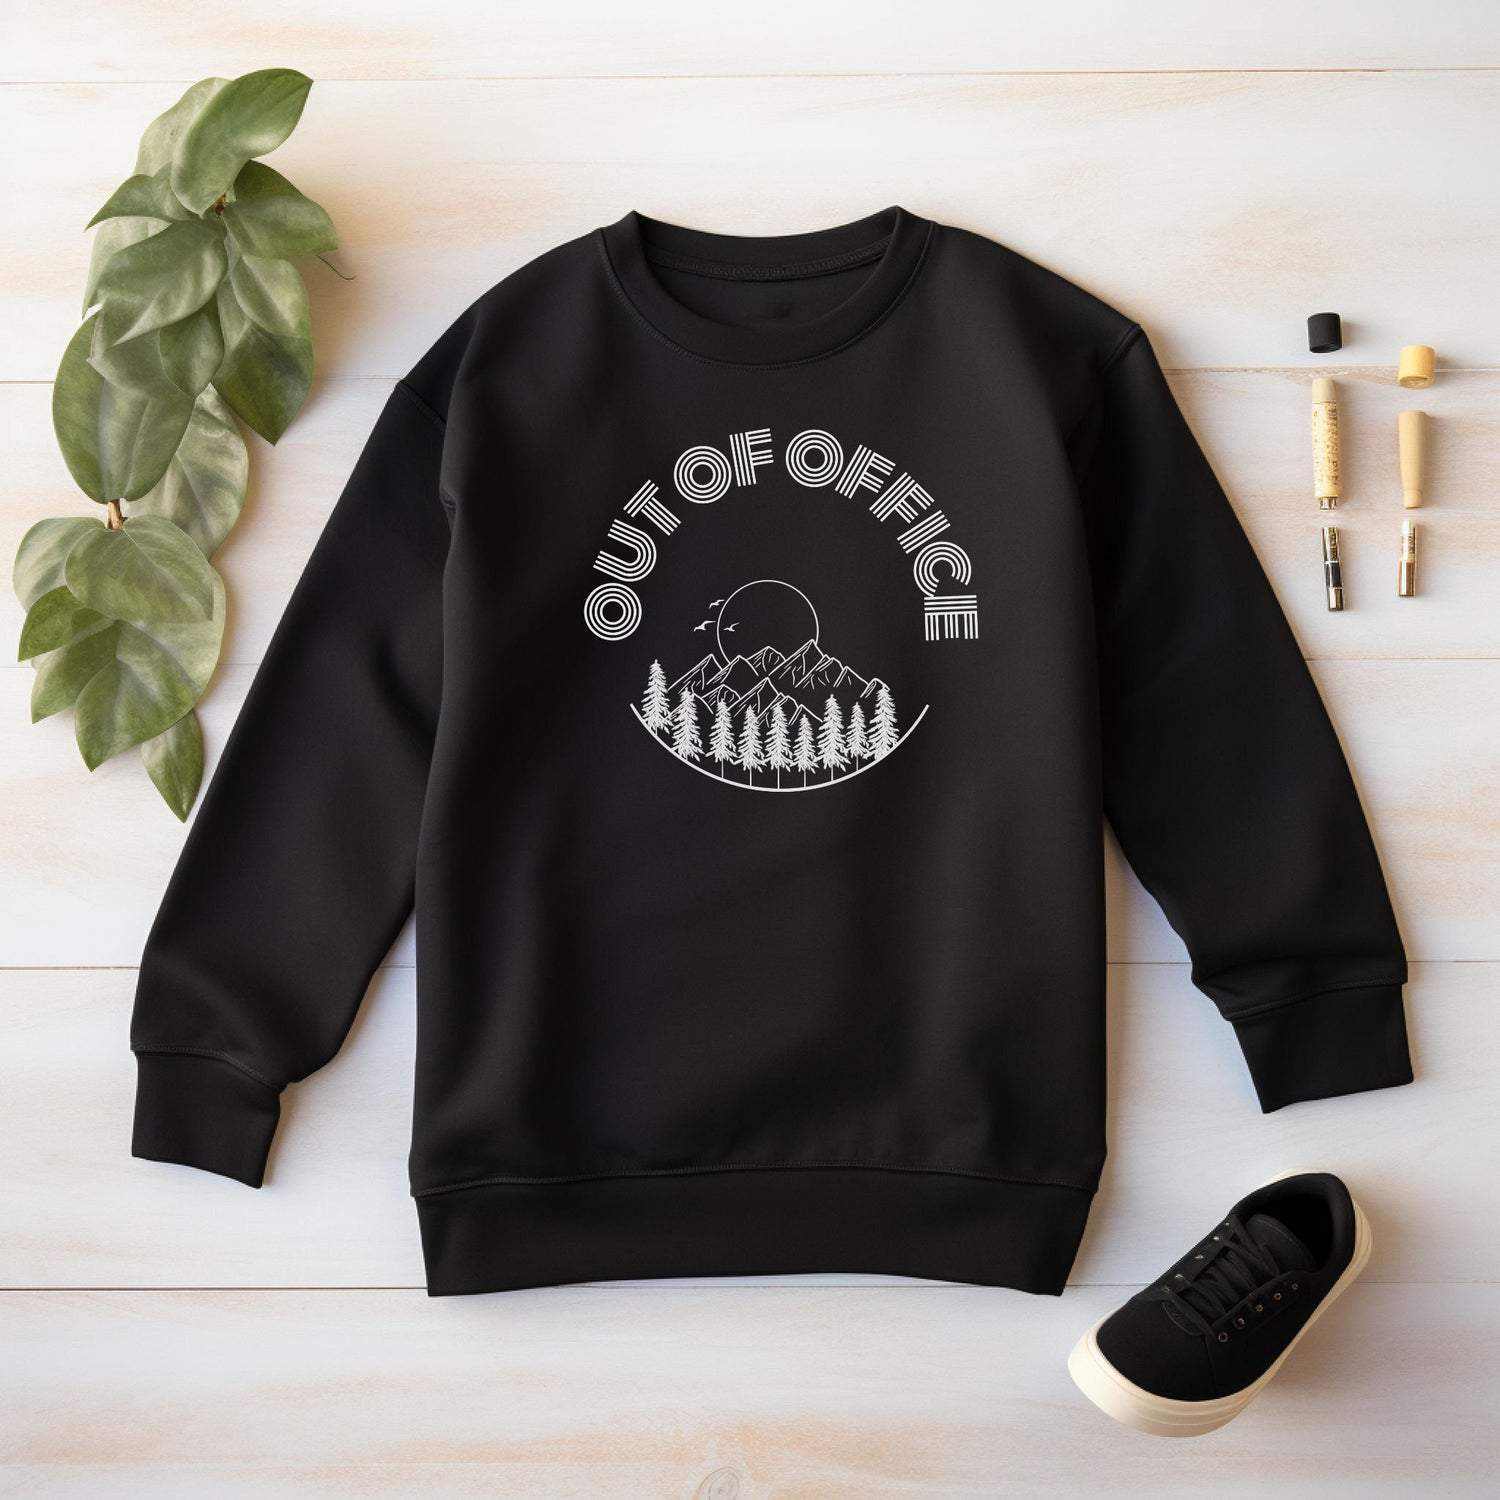 Out of Office Sweatshirt, Couples travel gift, travel gift, travel clothes, travel clothing, vacation mode, travel sweatshirt, travel gift women, travel gift for men, wanderlust, travel birthday gift, world traveler, traveler gift, couples gift